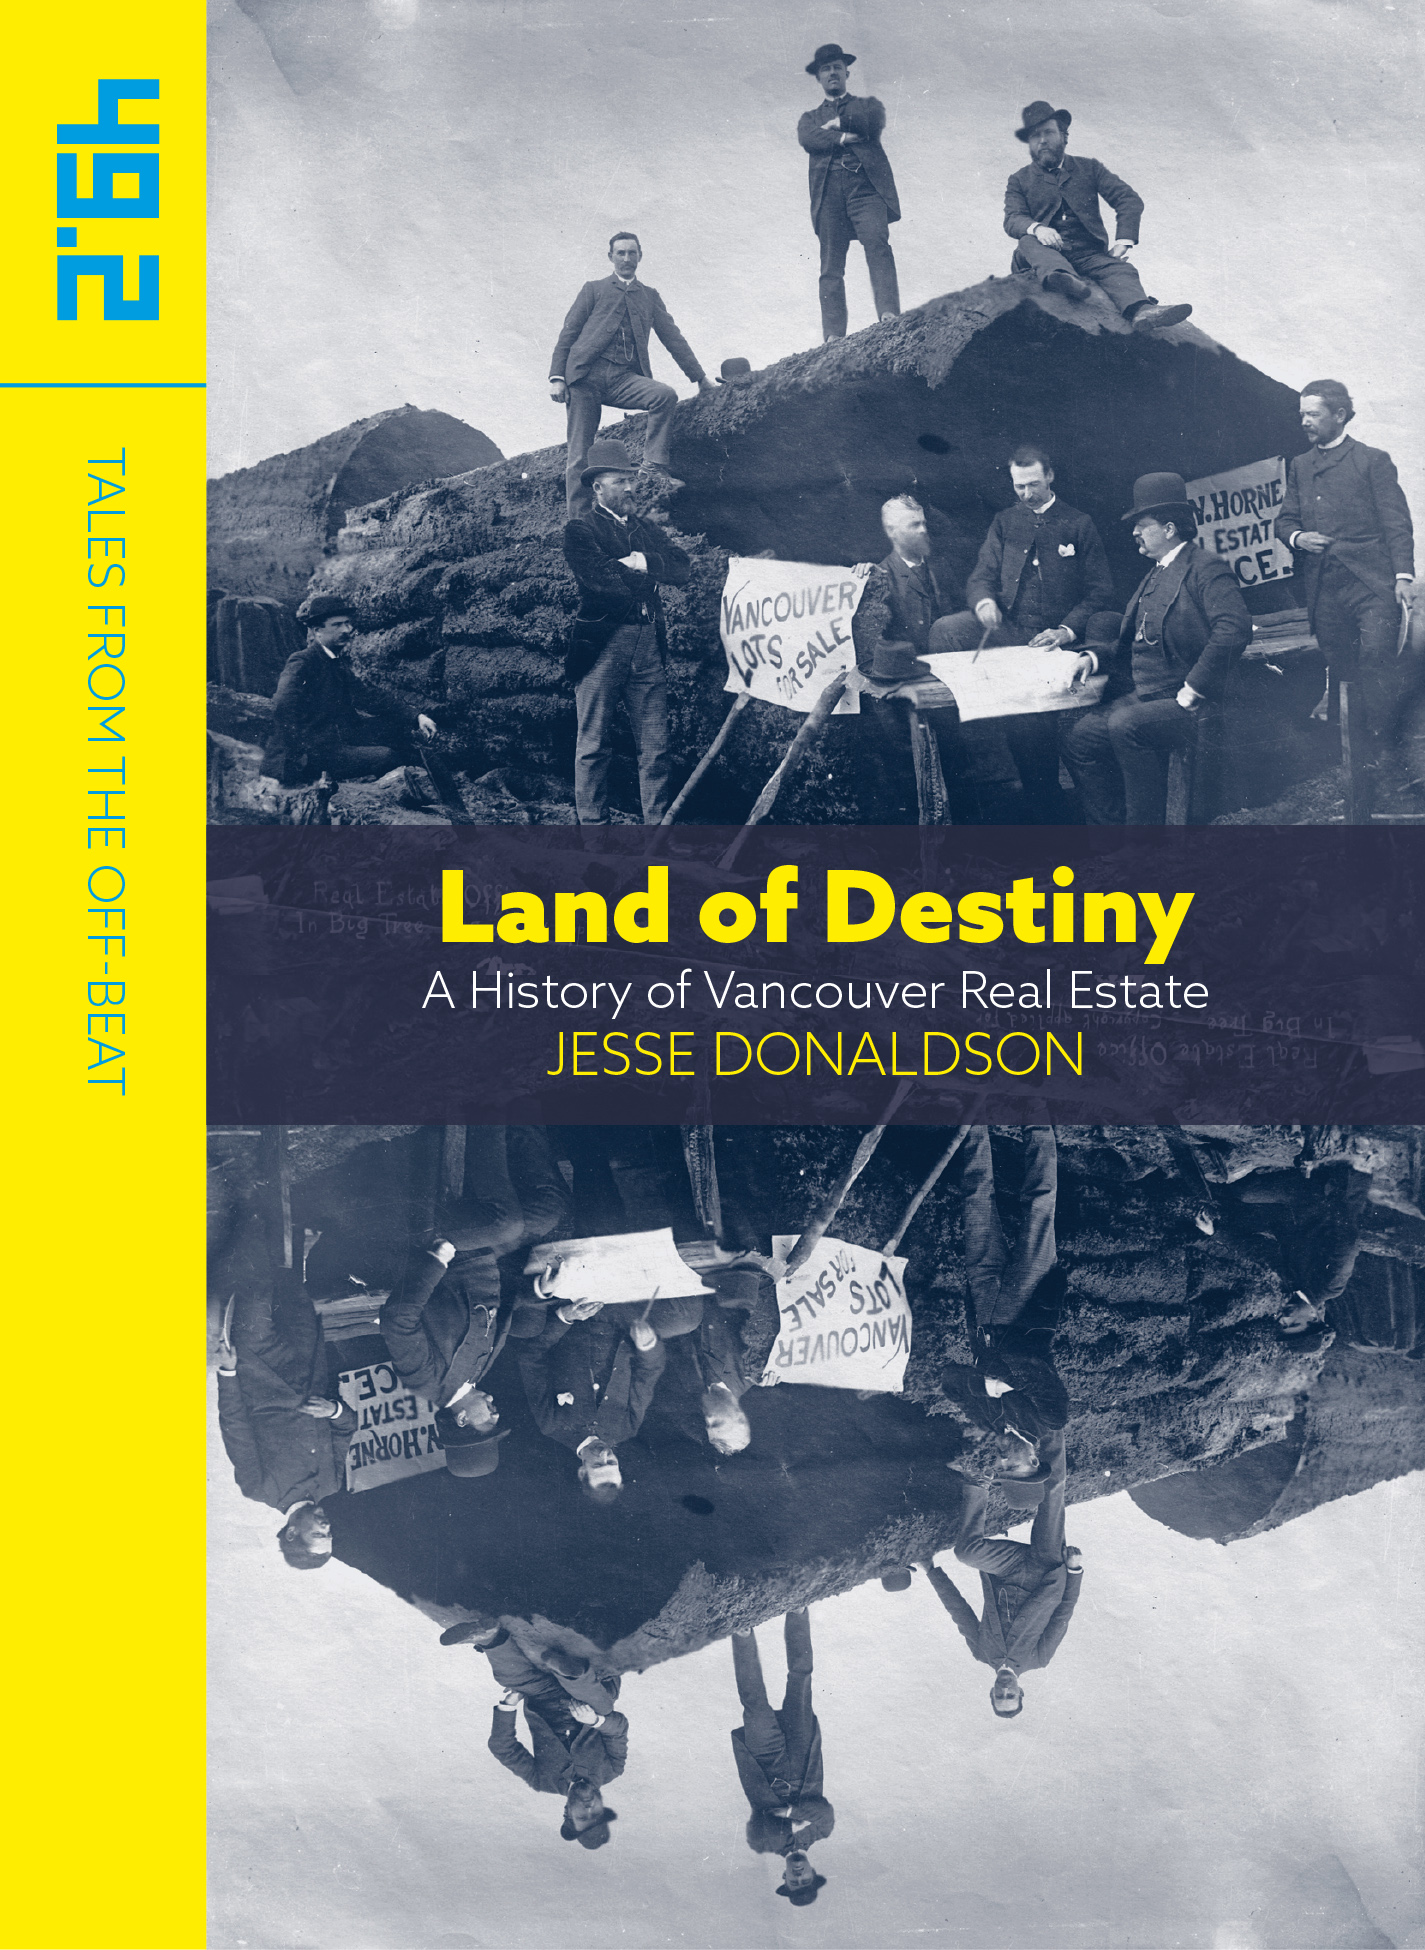 Land of Destiny: A History of Vancouver Real Estate